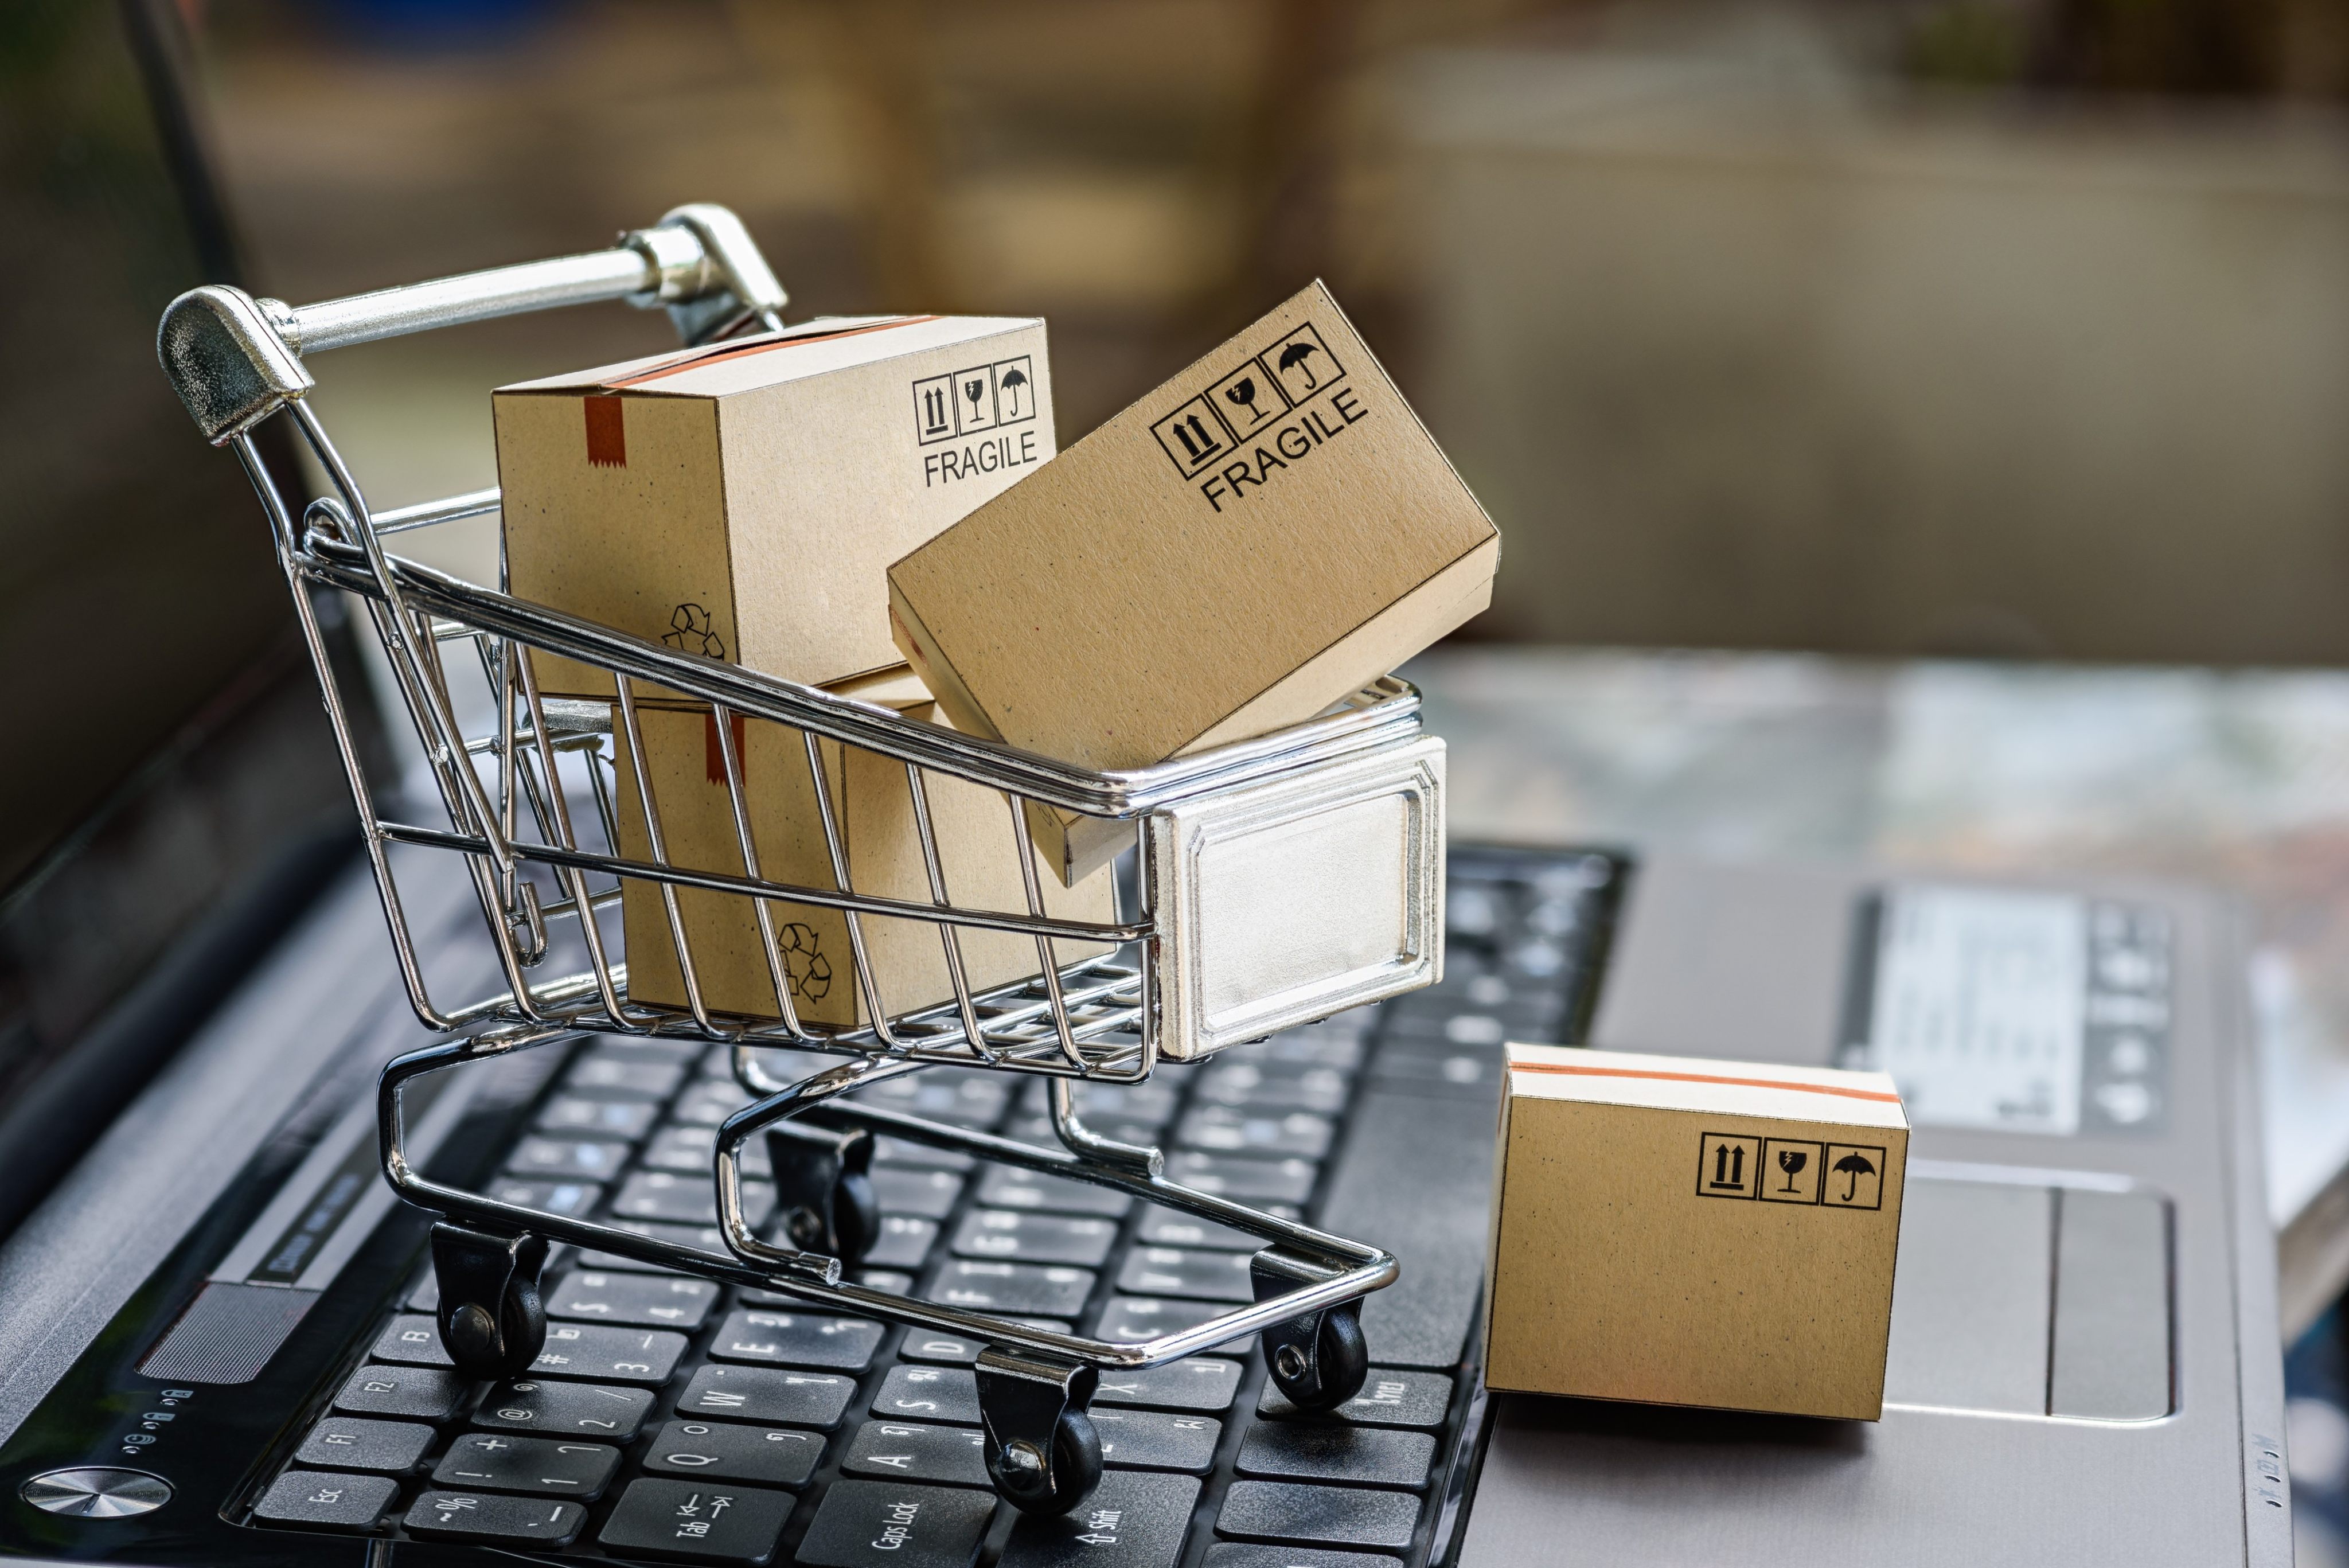 Online retail sales are rising sharply, particularly in Asia-Pacific. Photo: Shutterstock